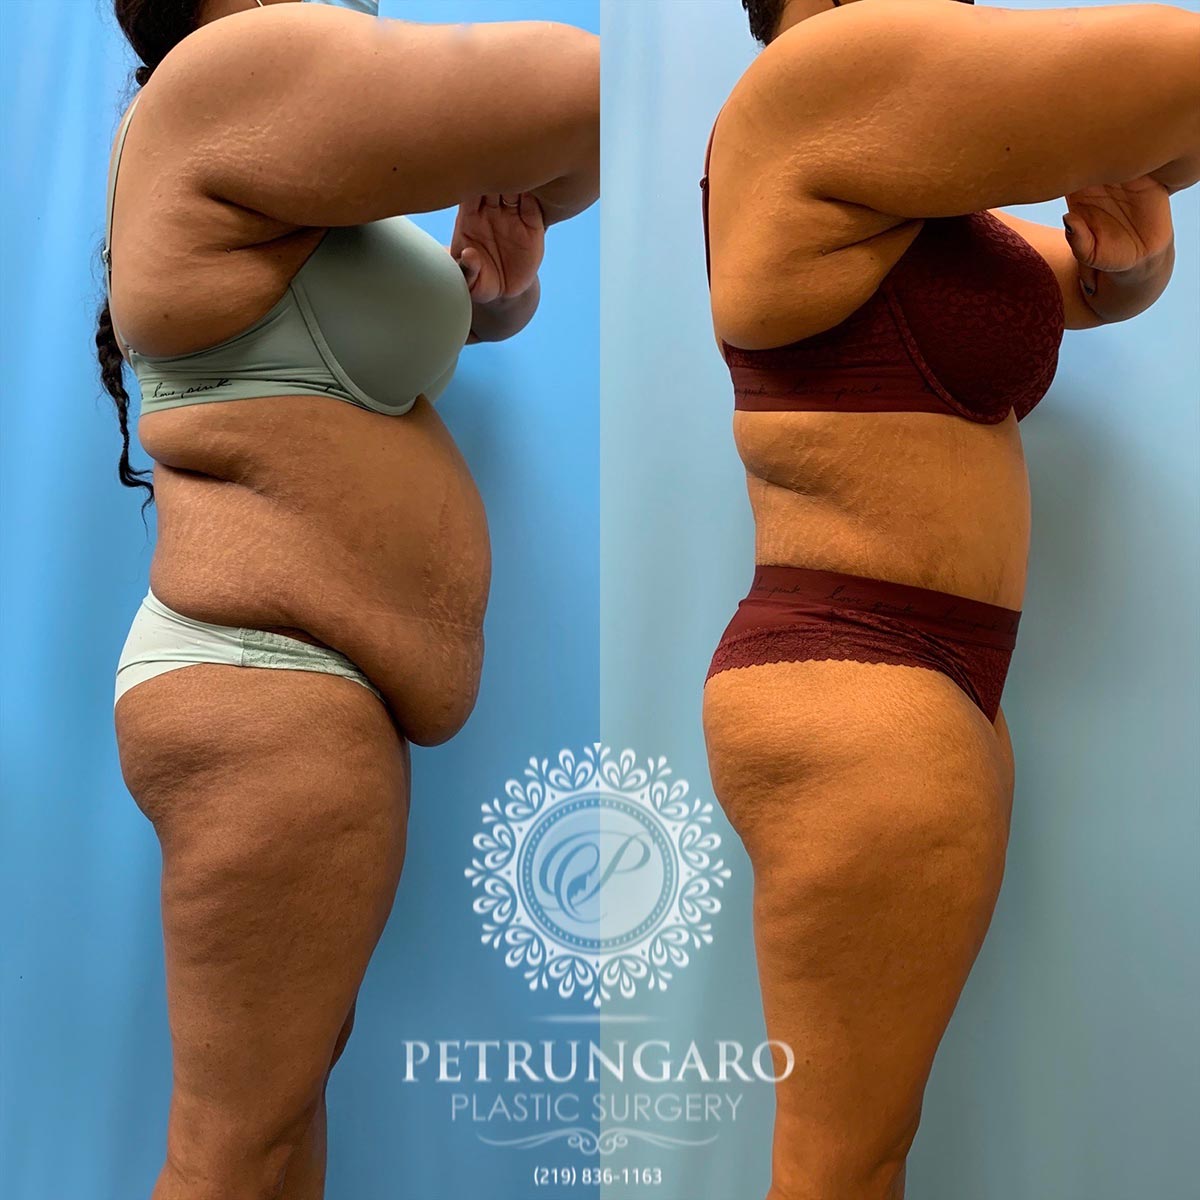 37 year old woman 3 months after tummy tuck with Lipo 360-3